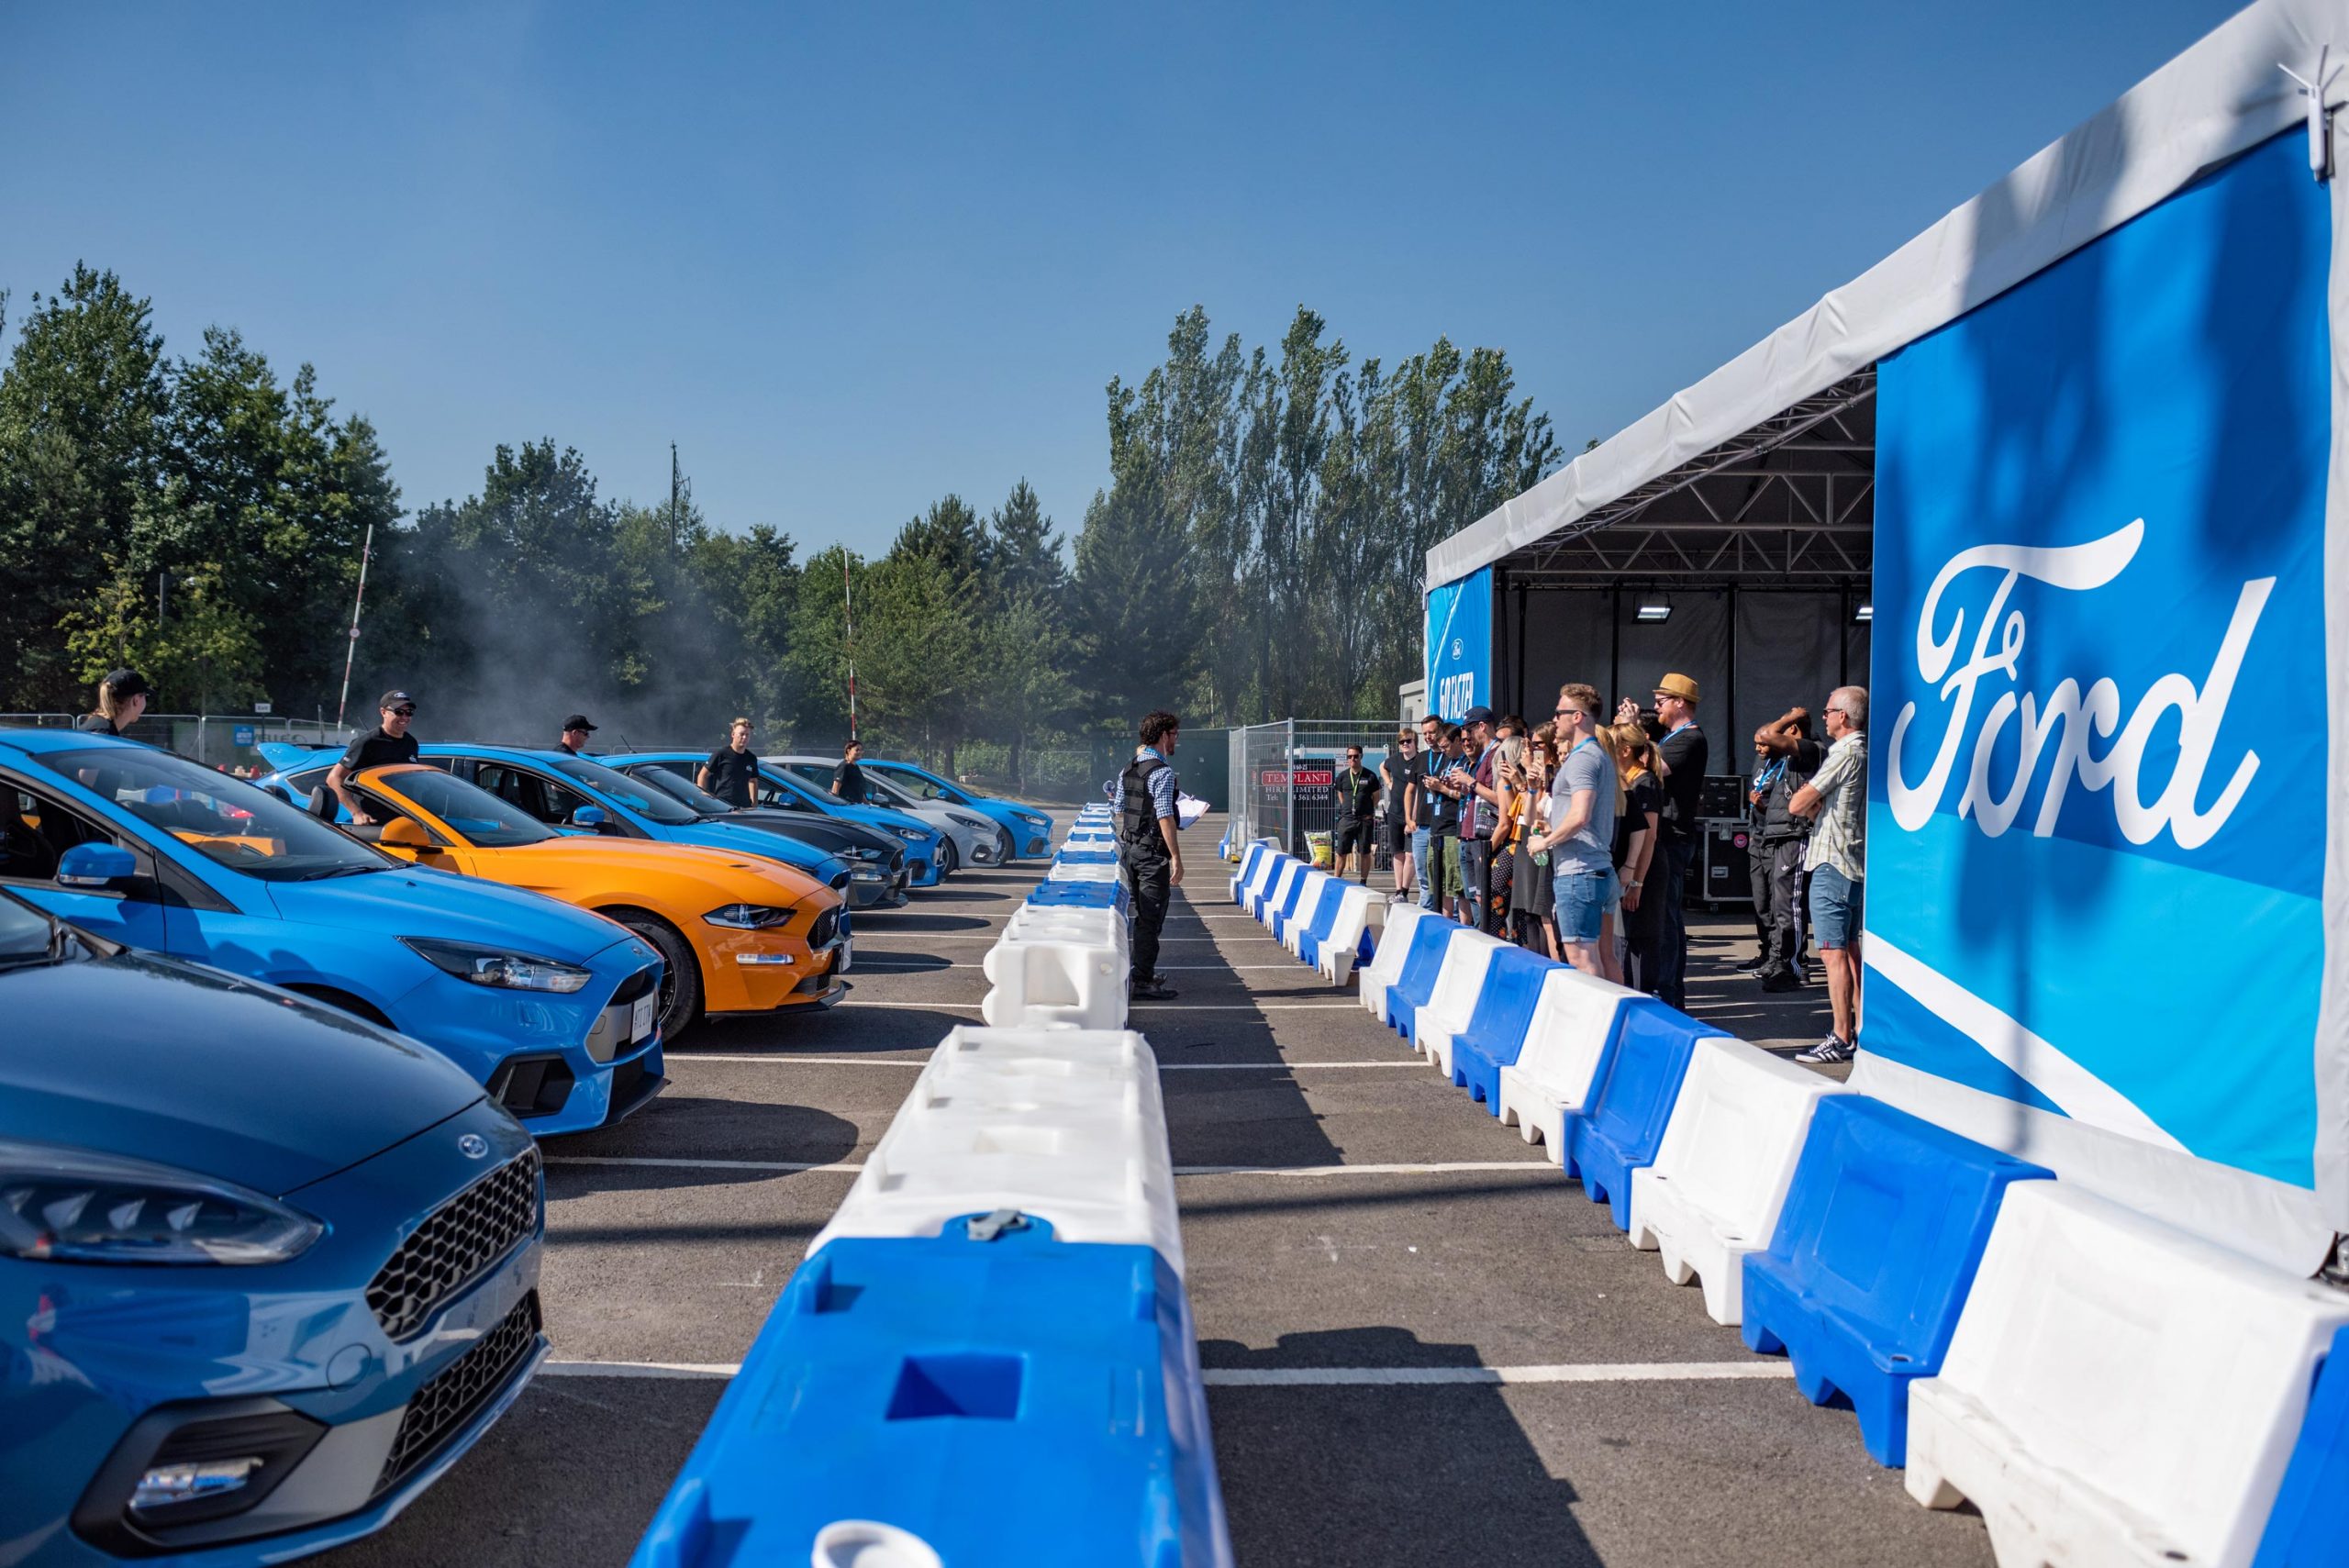 A scene of excitement captured by Wright Content, showcasing cars lined up and facing the audience at the Ford Test Centre track. Journalists invited to the event stand attentively, listening to a briefing from a professional driver in anticipation of their turn behind the wheel. Wright Content specializes in dynamic motorsport event photography.